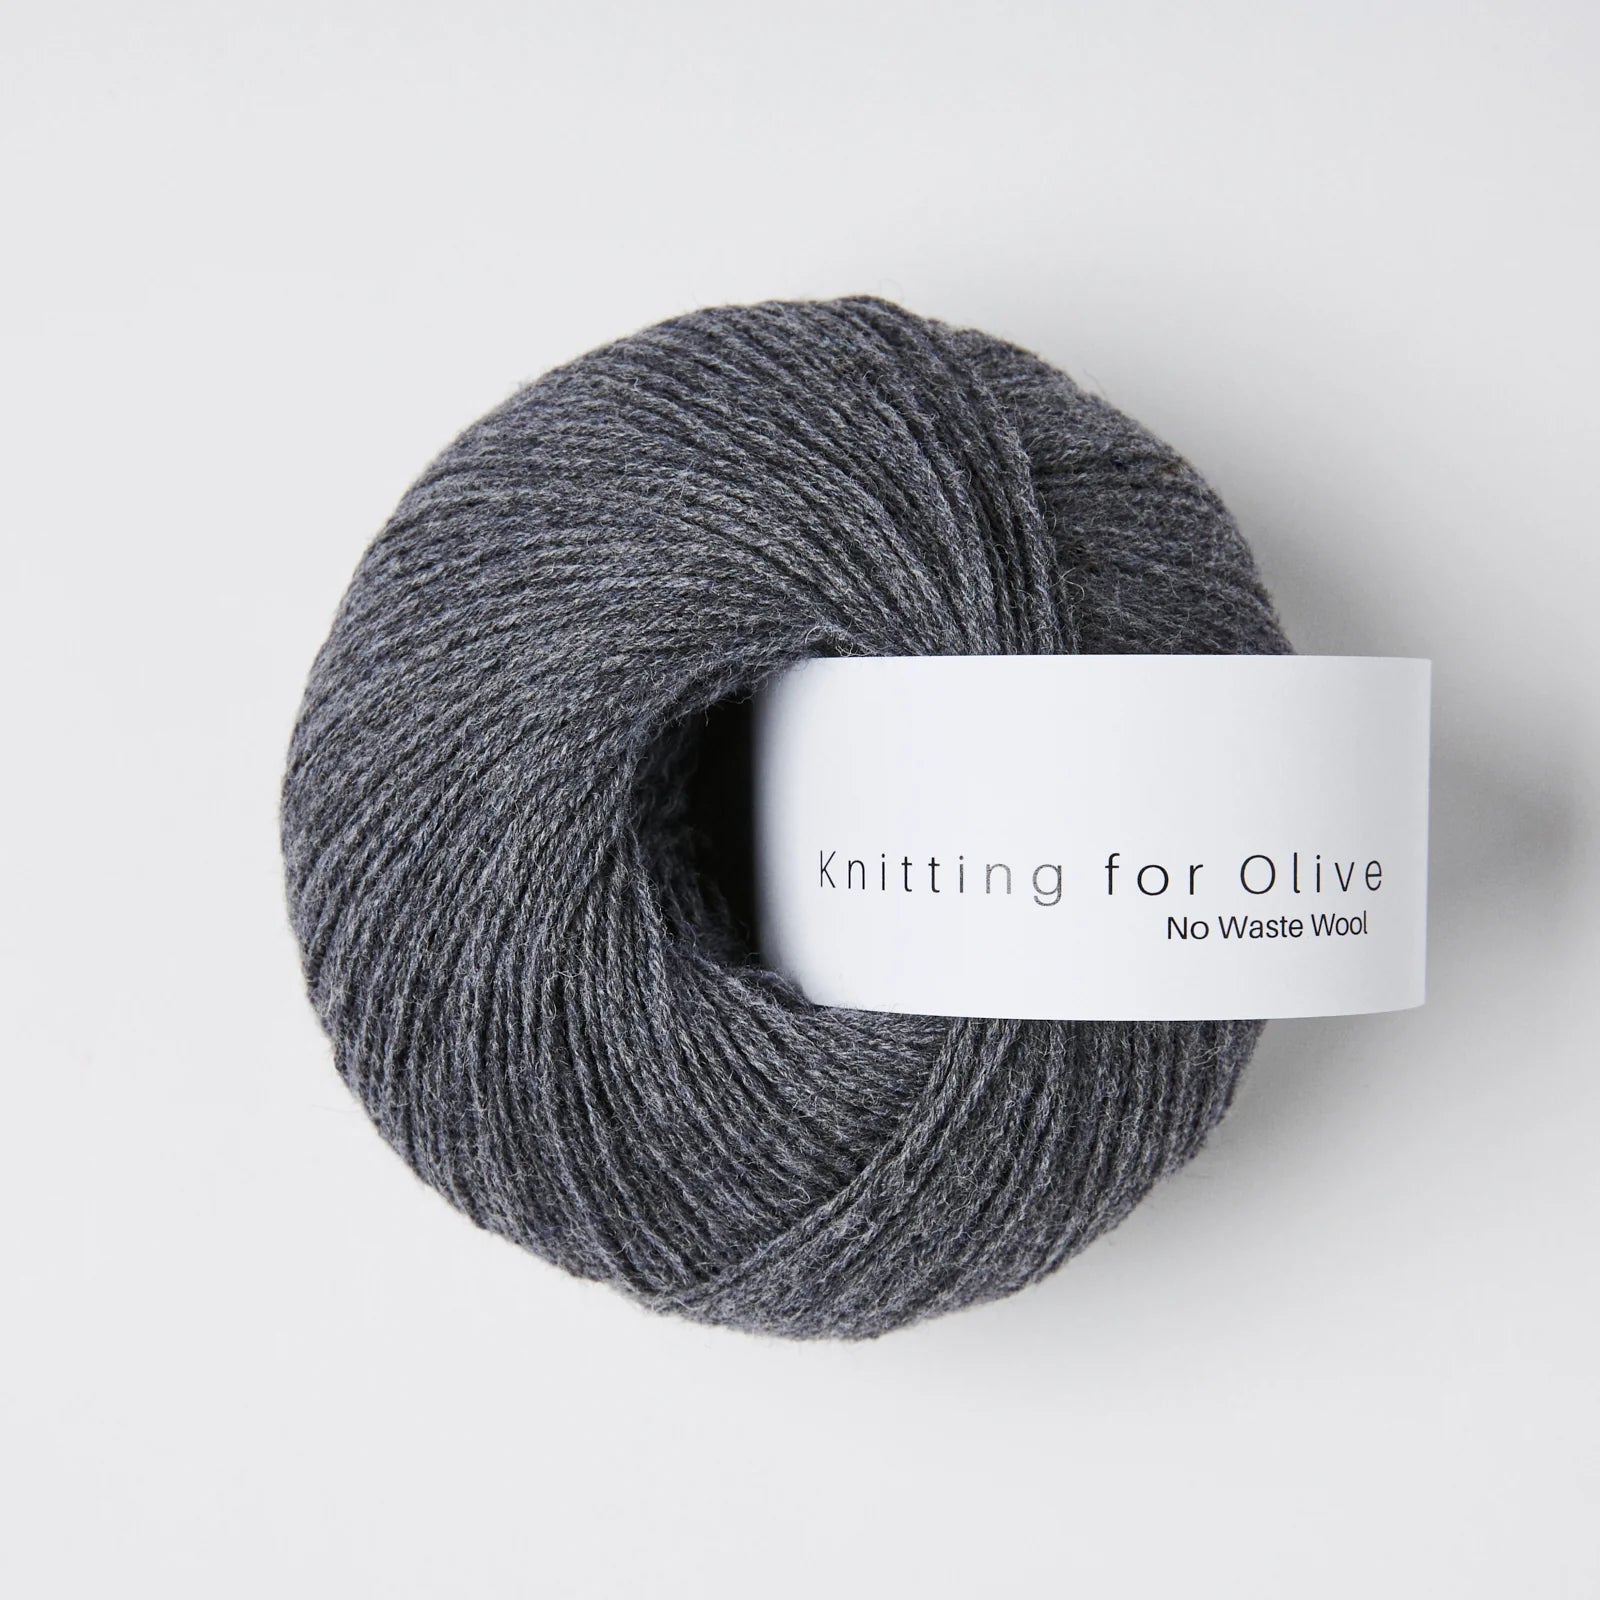 Knitting for Olive No Waste Wool - Knitting for Olive - Thunder Cloud - The Little Yarn Store